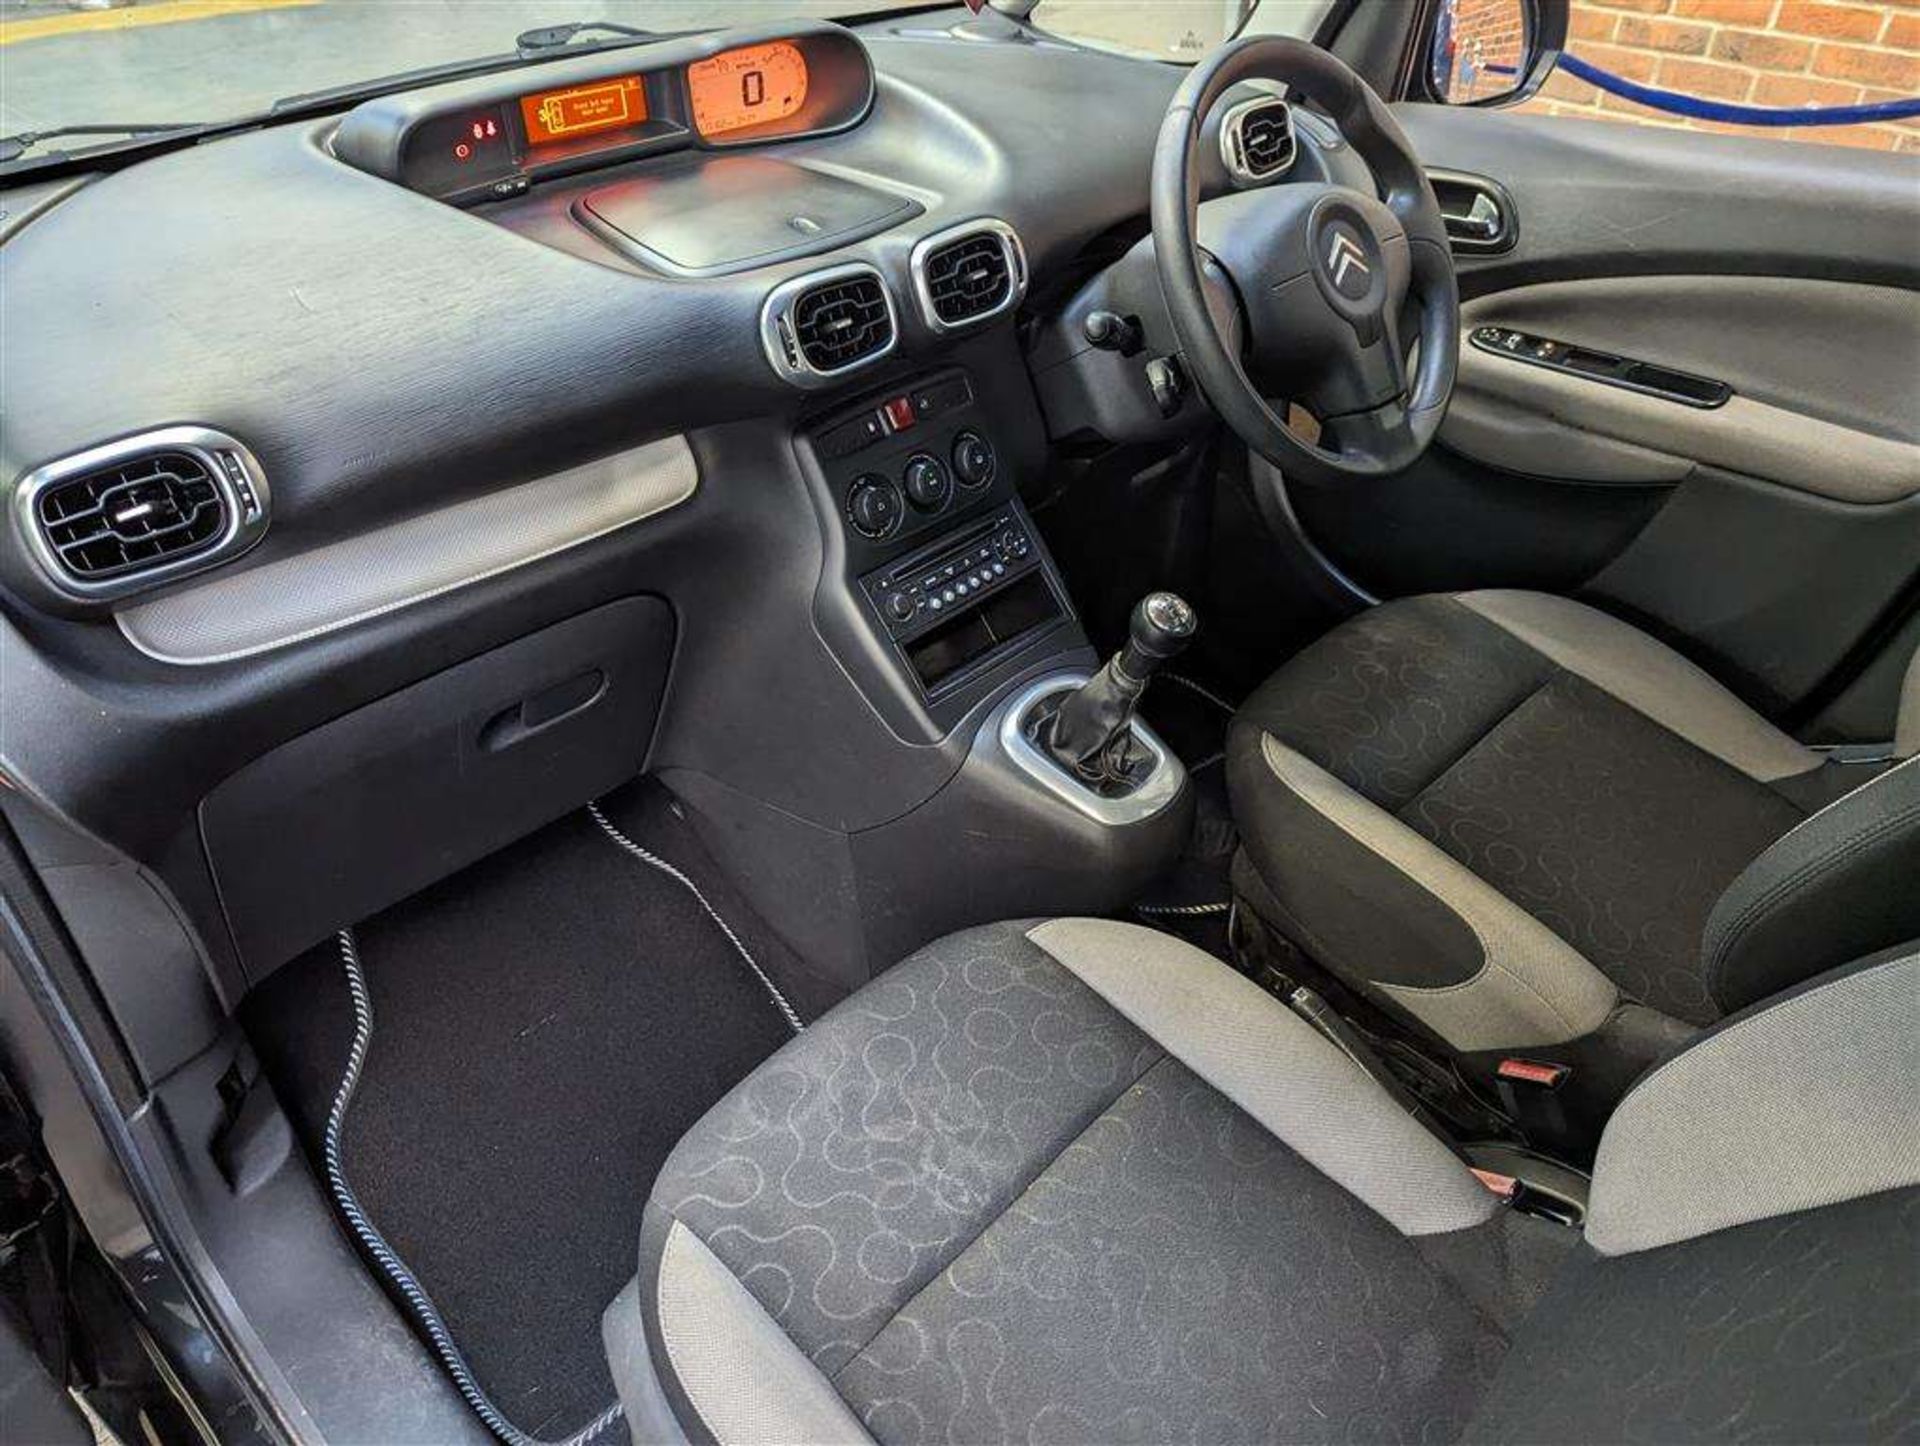 2011 CITROEN C3 PICASSO VTR+ HDI - Image 10 of 28